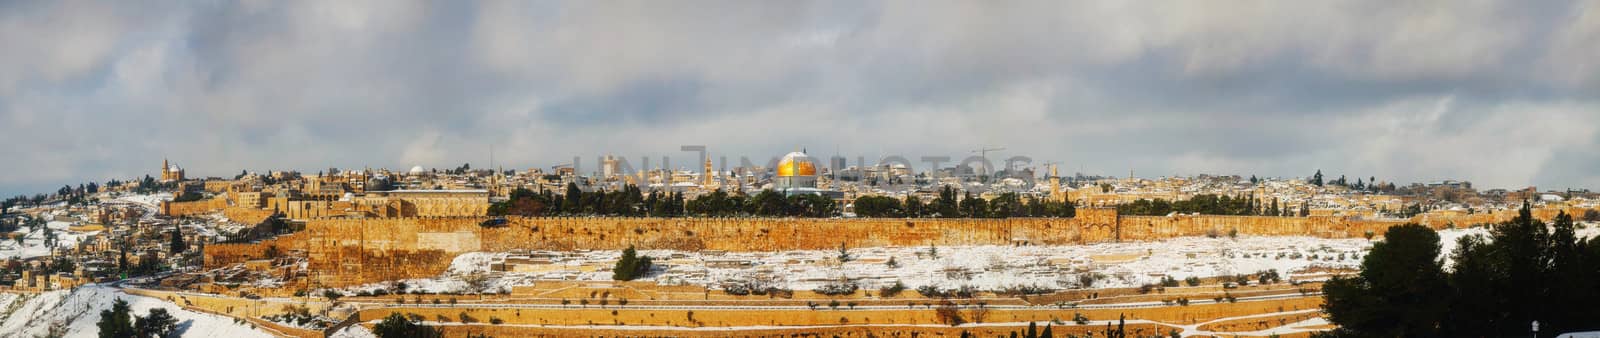 Panorama of Old City in Jerusalem, Israel with The Golden Dome Mosque